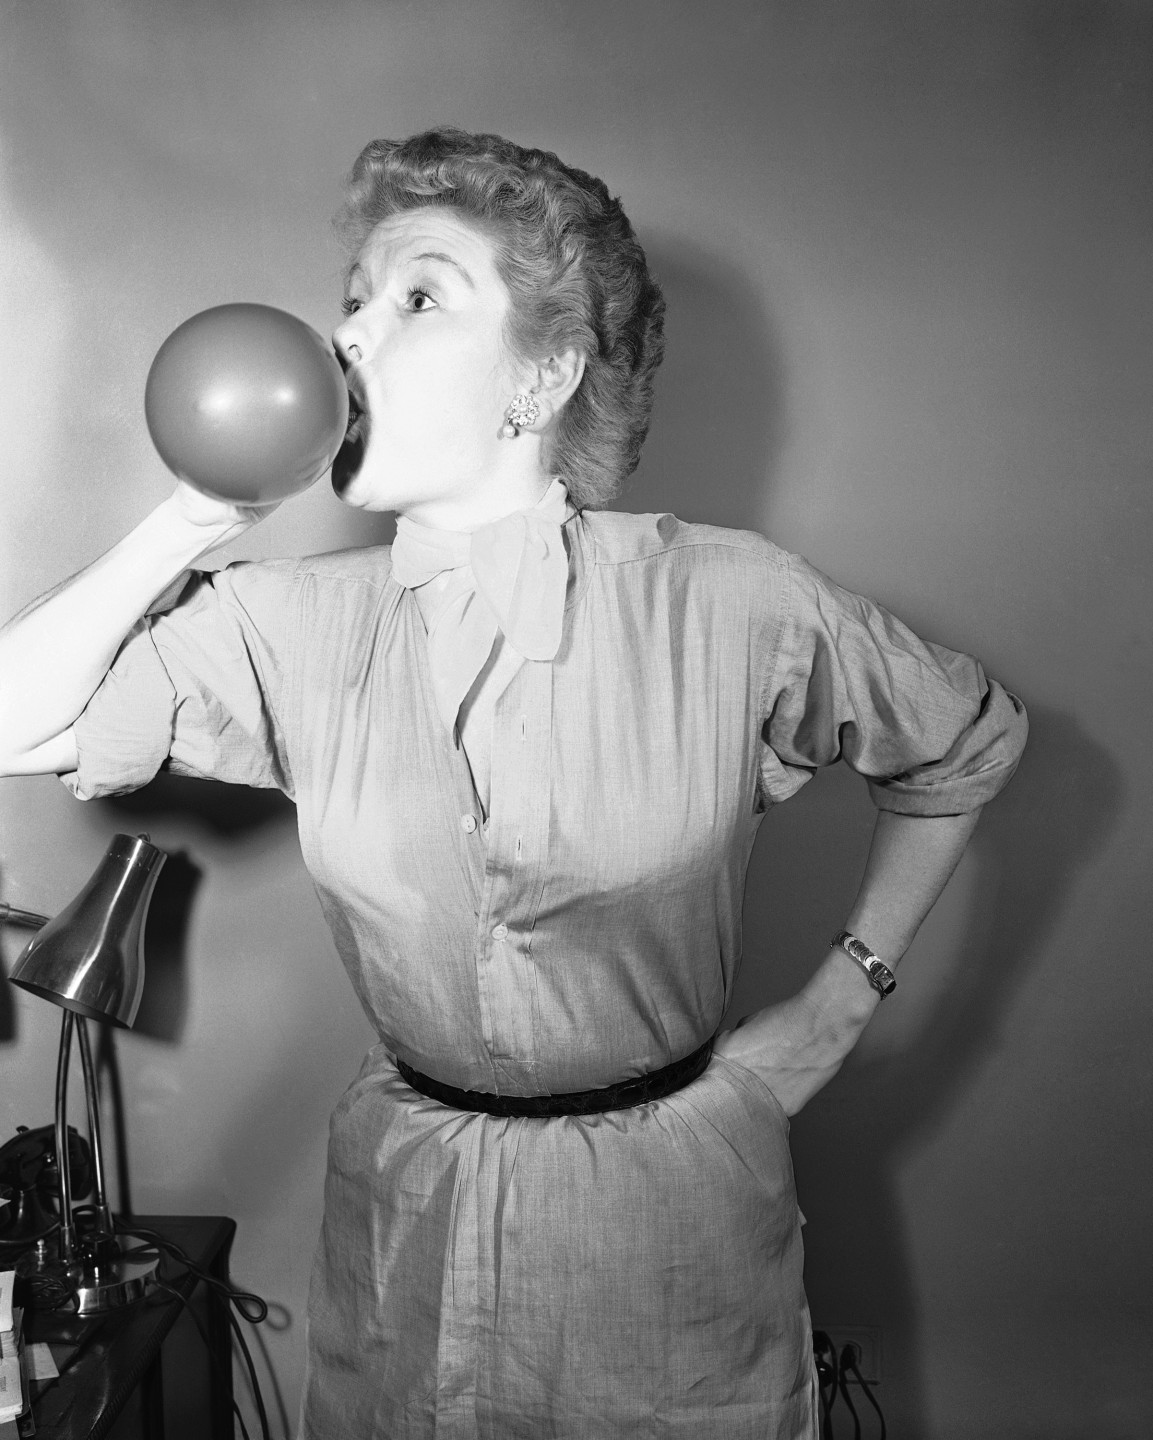 Stritch blows up balloons as a voice training exercise in November 1954.